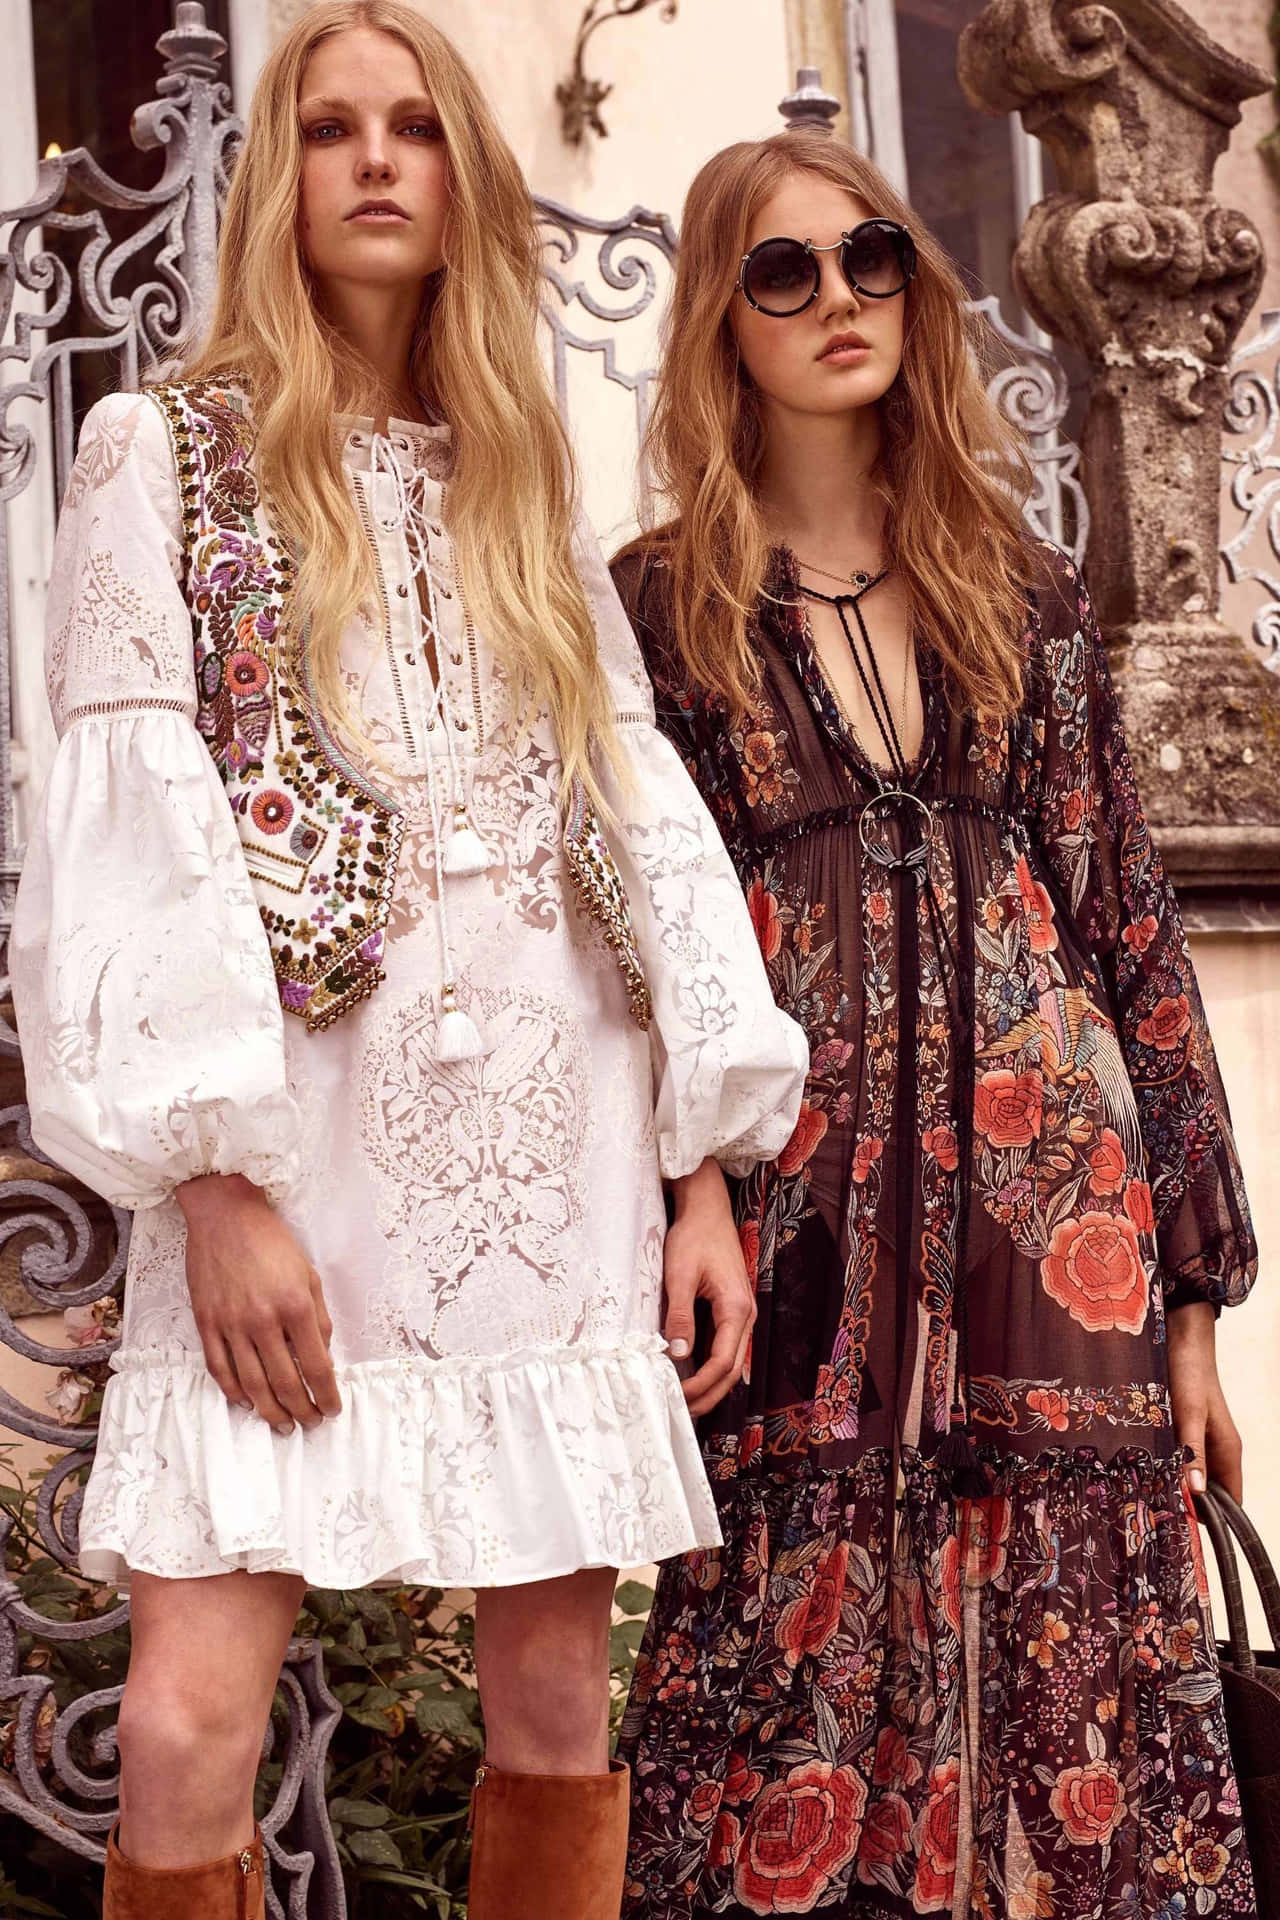 Two Women In Floral Dresses Standing Next To Each Other